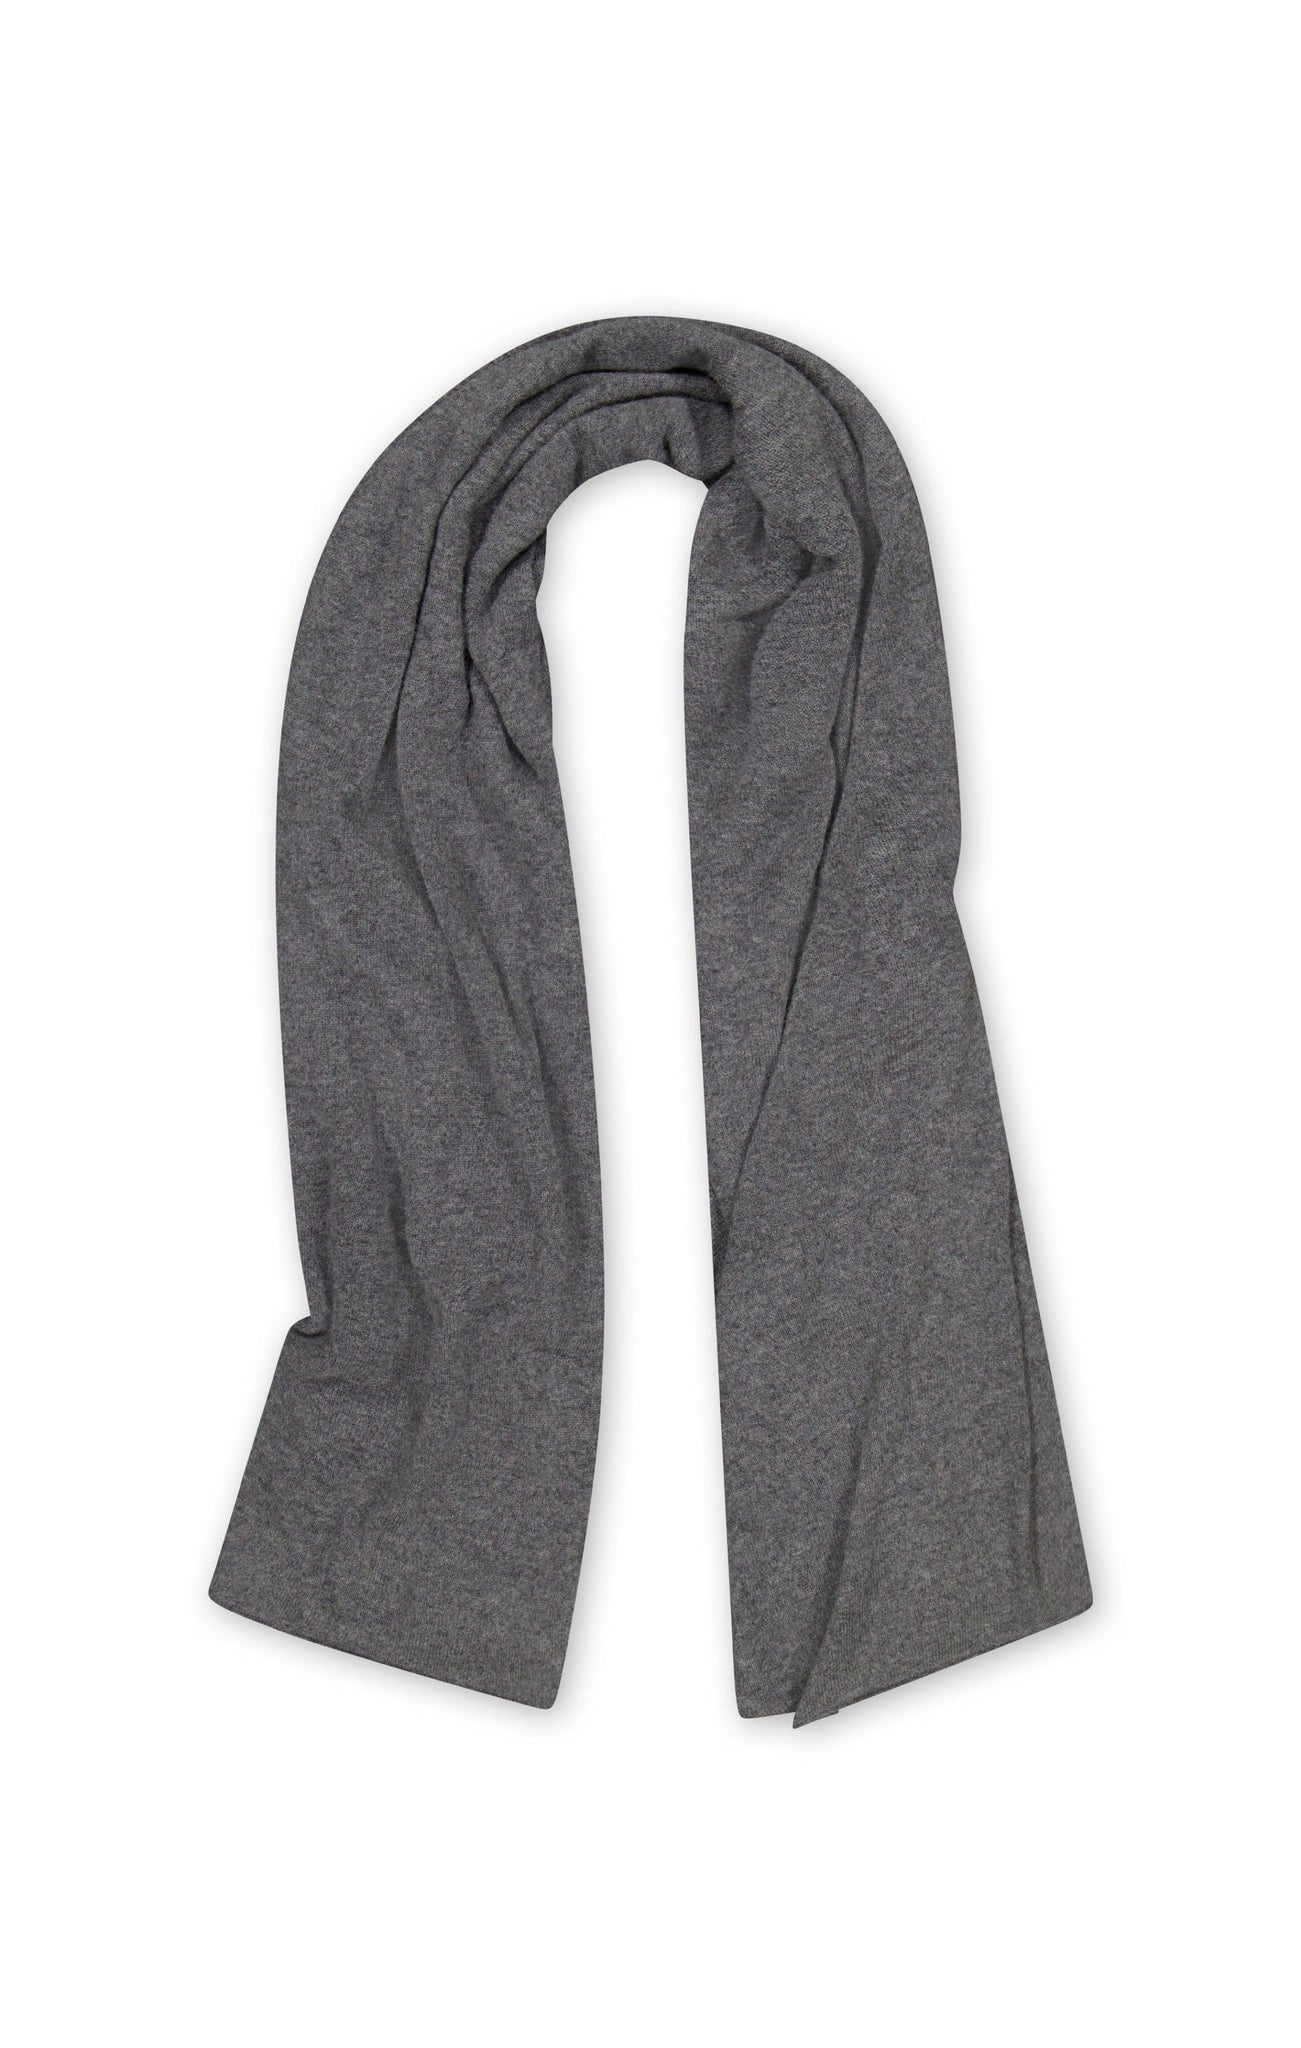 Cashmere Wear Anywhere Wrap